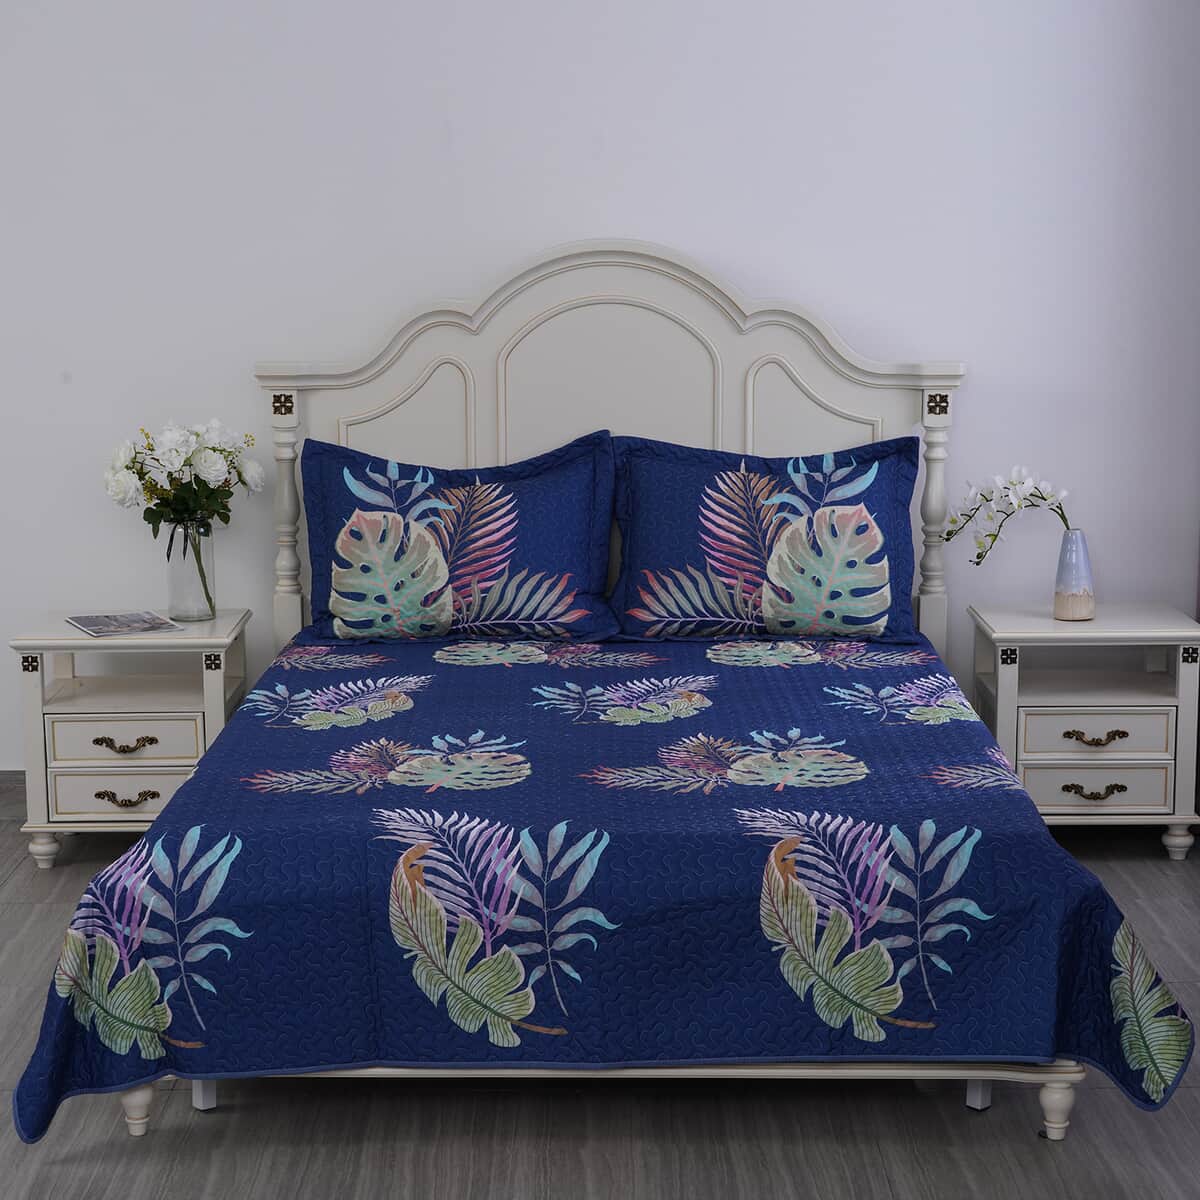 Homesmart Blue Tropical Digital Print 100% Microfiber Quilted Bedspread and 2 Pillow Shams - King image number 1